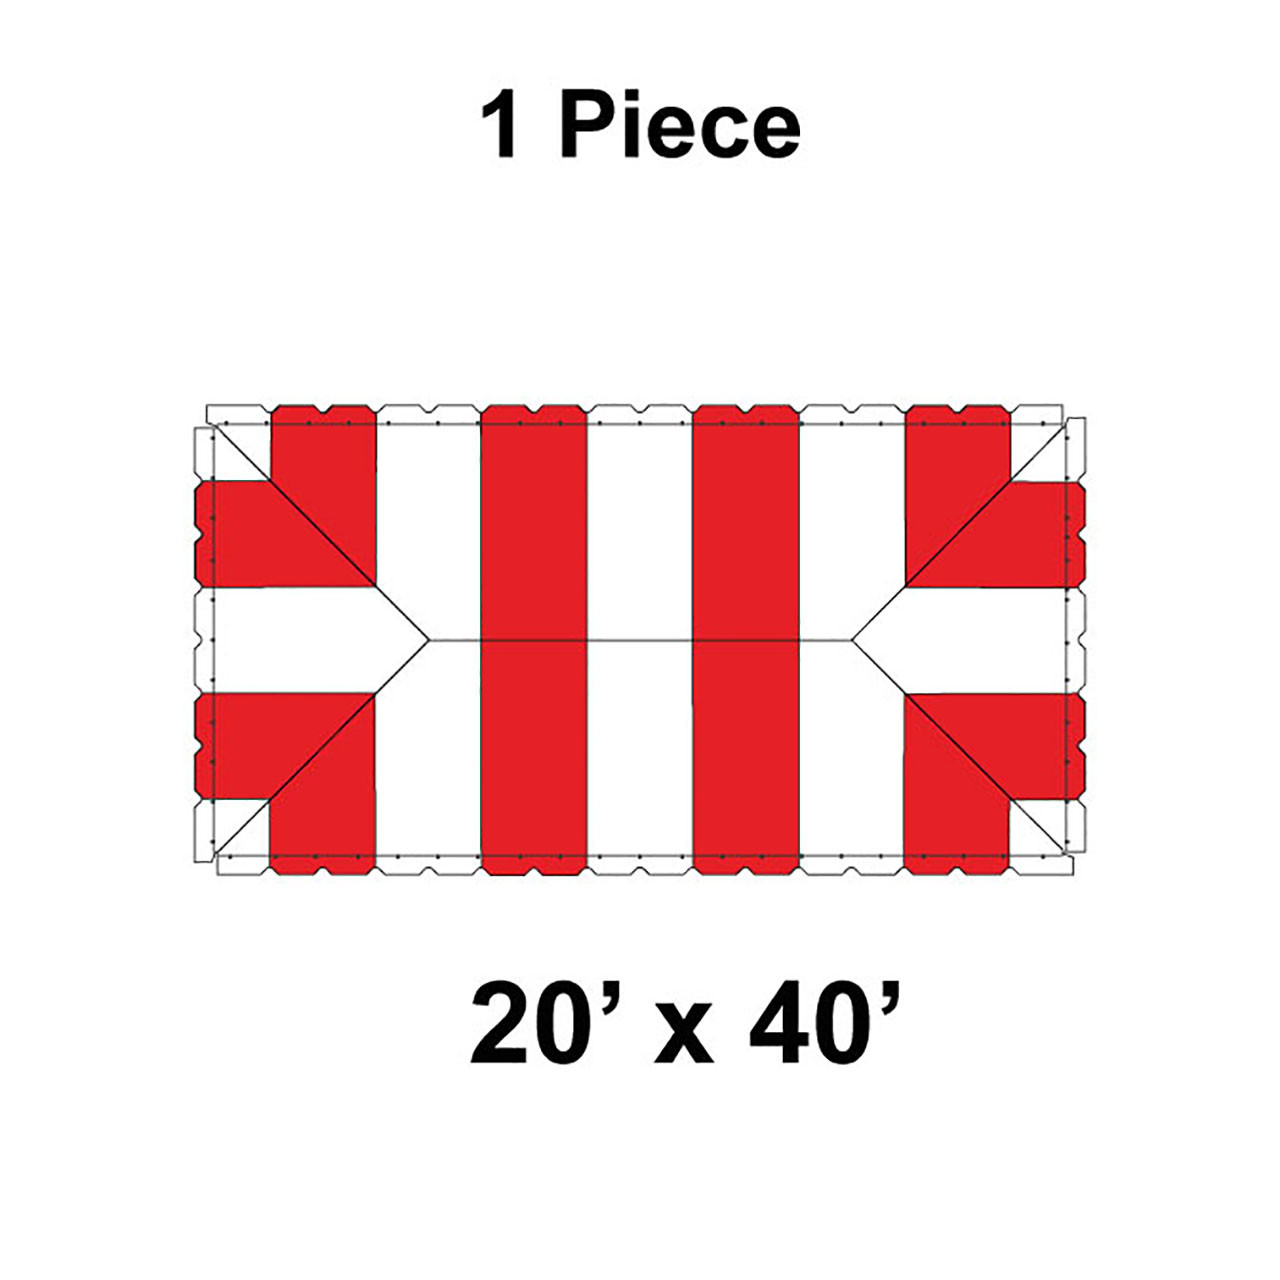 20' x 40' Classic Pole Tent, 1 Piece, 16 oz. Ratchet Top, White and Red